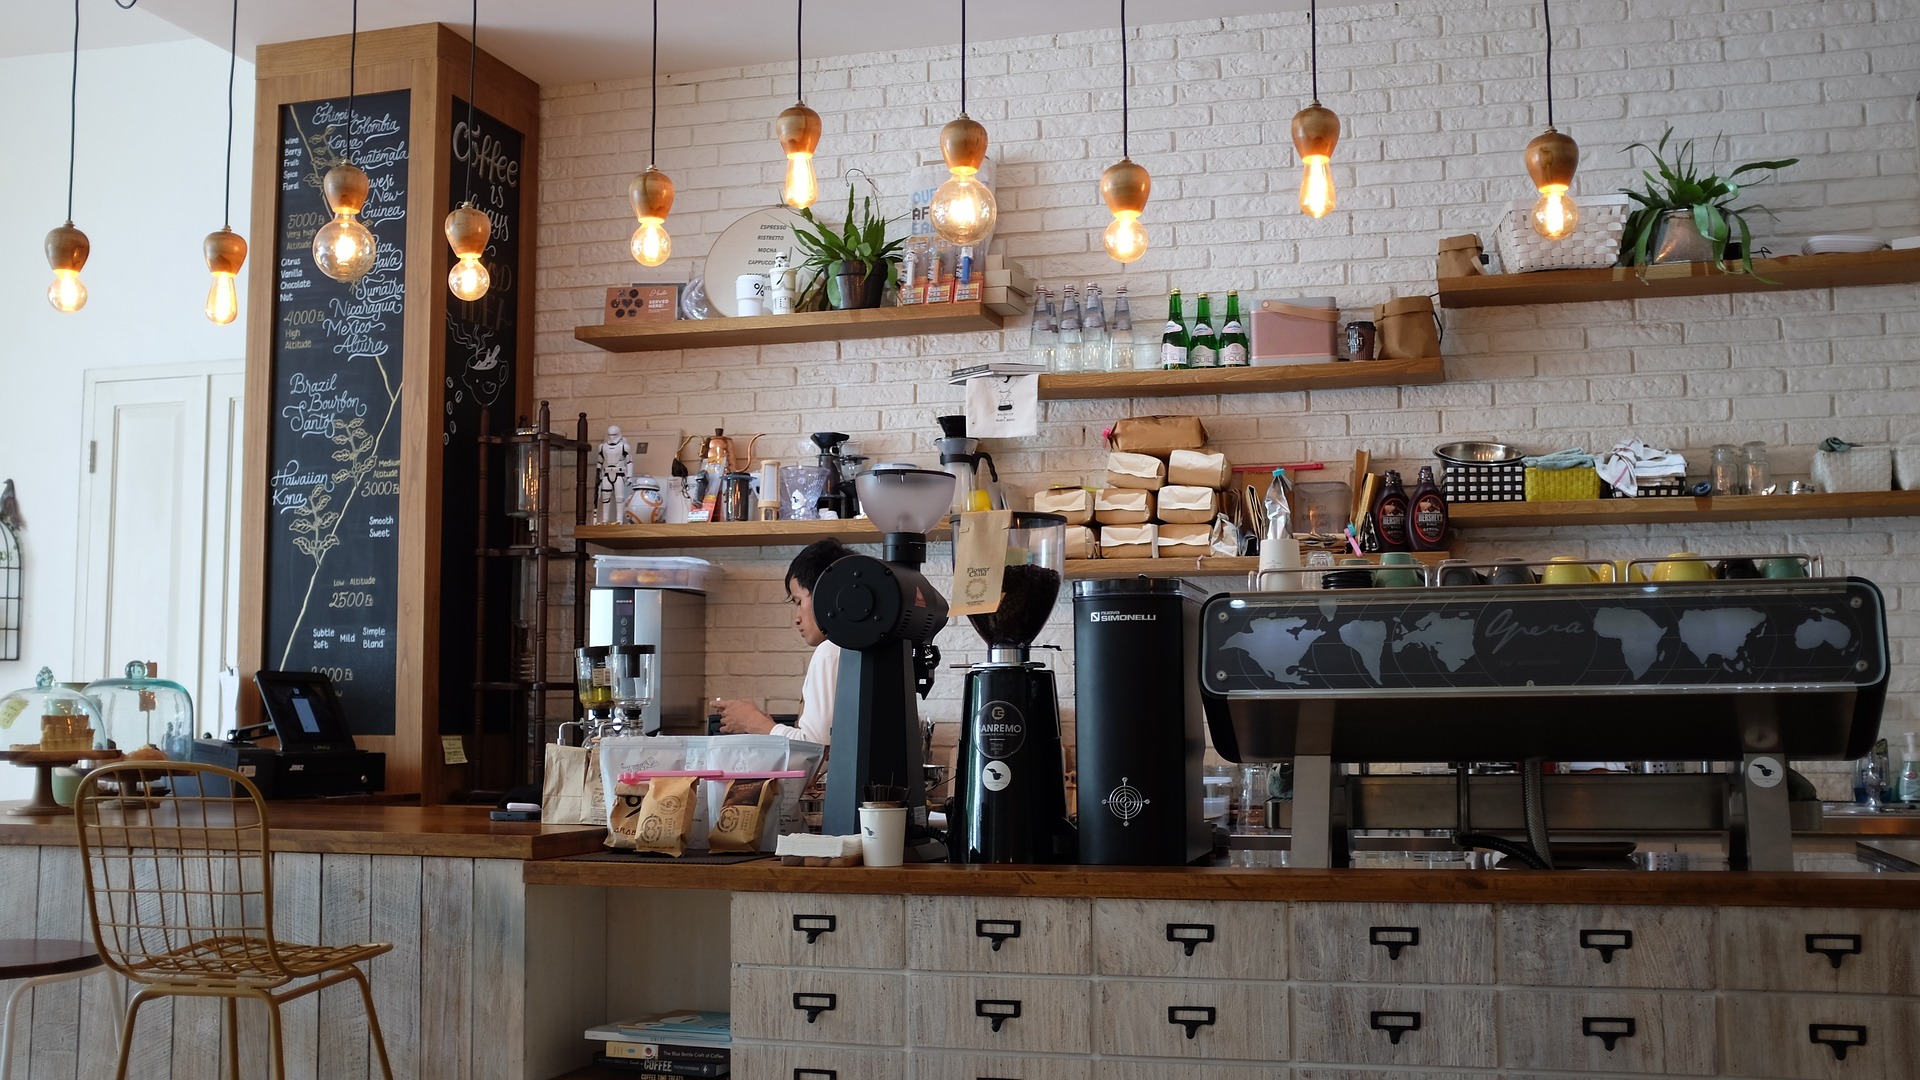 https://blog.indifi.com/wp-content/uploads/2019/05/Equipment-required-for-setting-up-a-Coffee-Shop.jpg